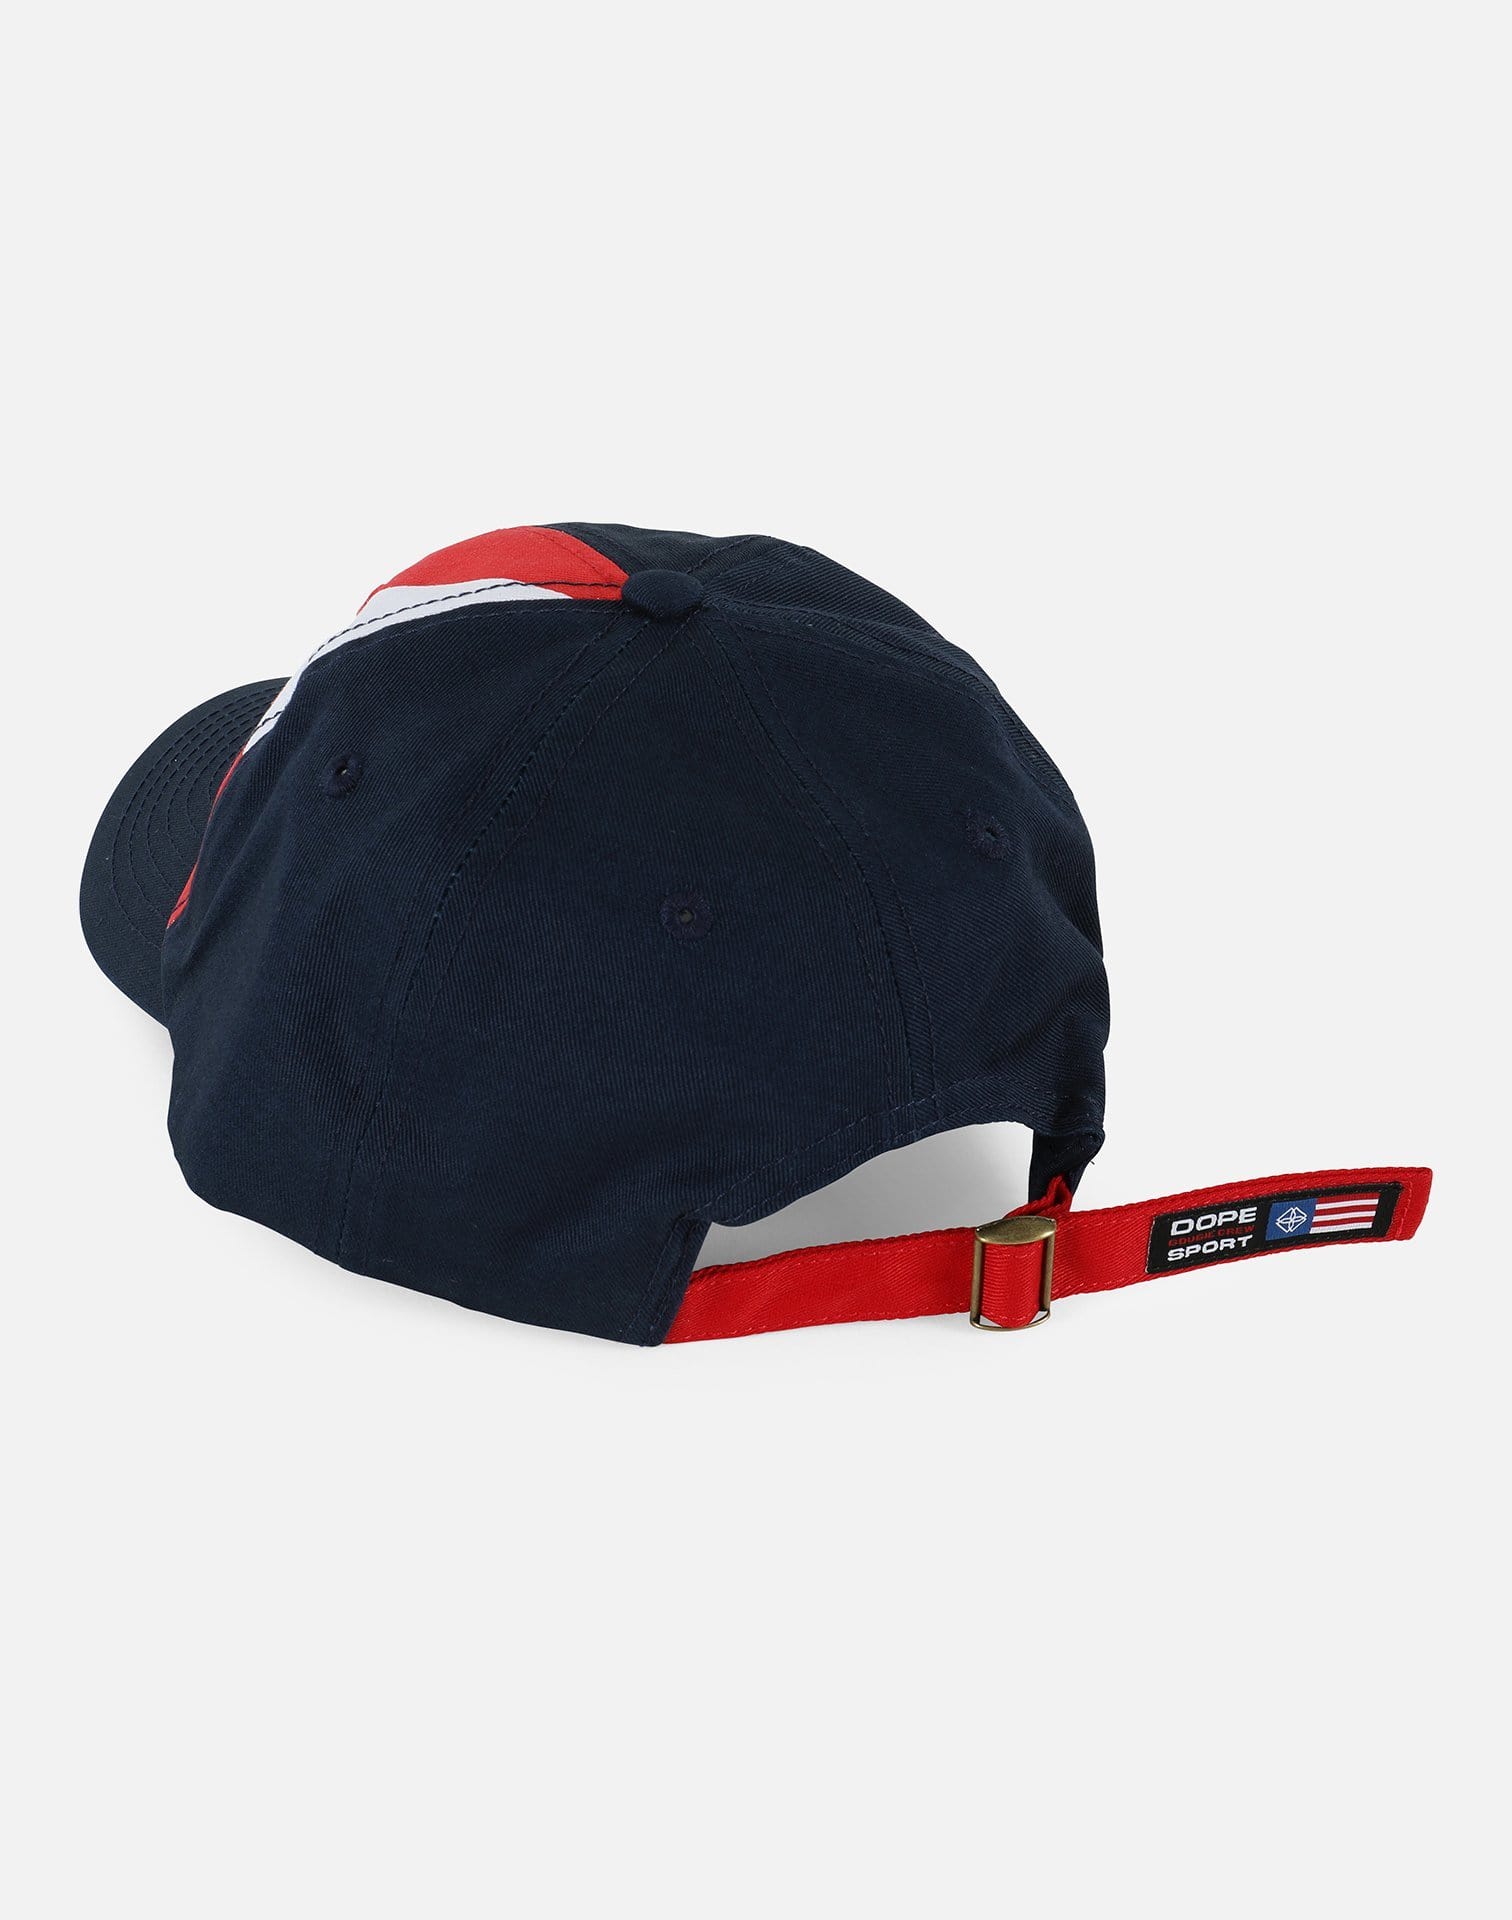 Dope Pace Strapback Hat